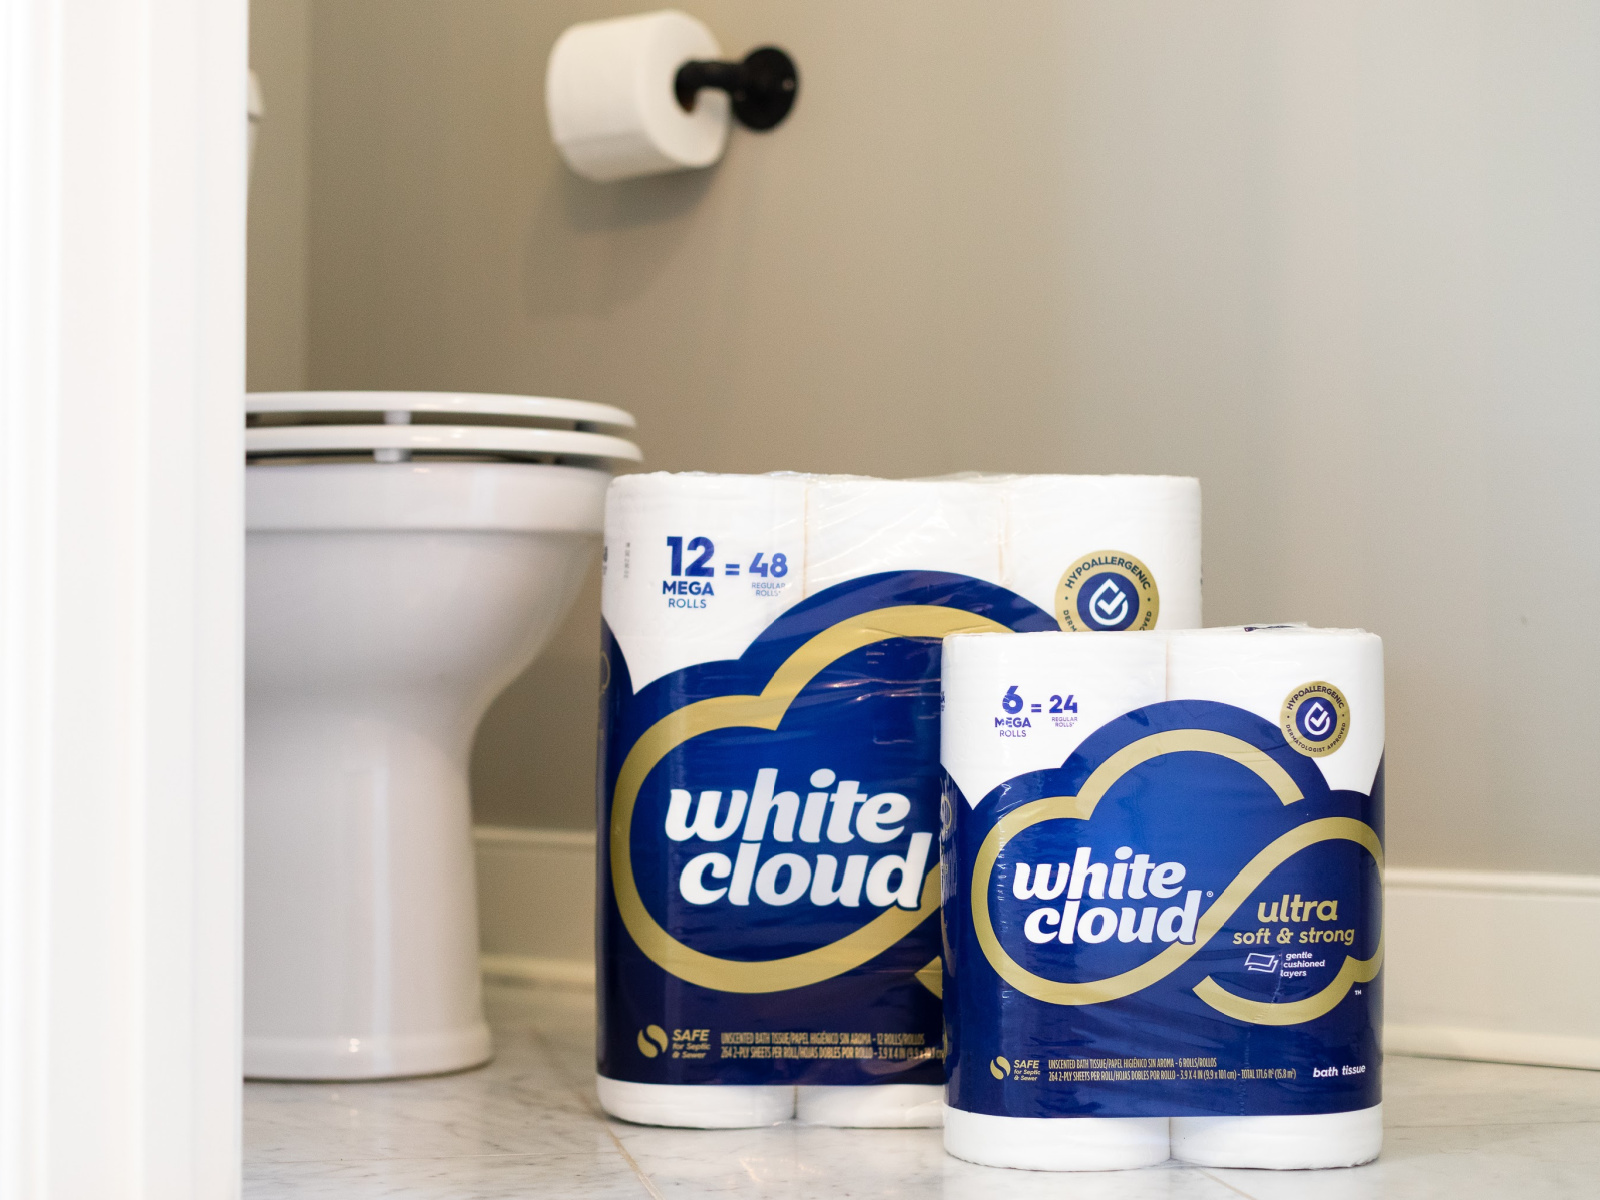 Big Savings On White Cloud® Ultra Soft & Strong Toilet Paper – Save $3 At Publix